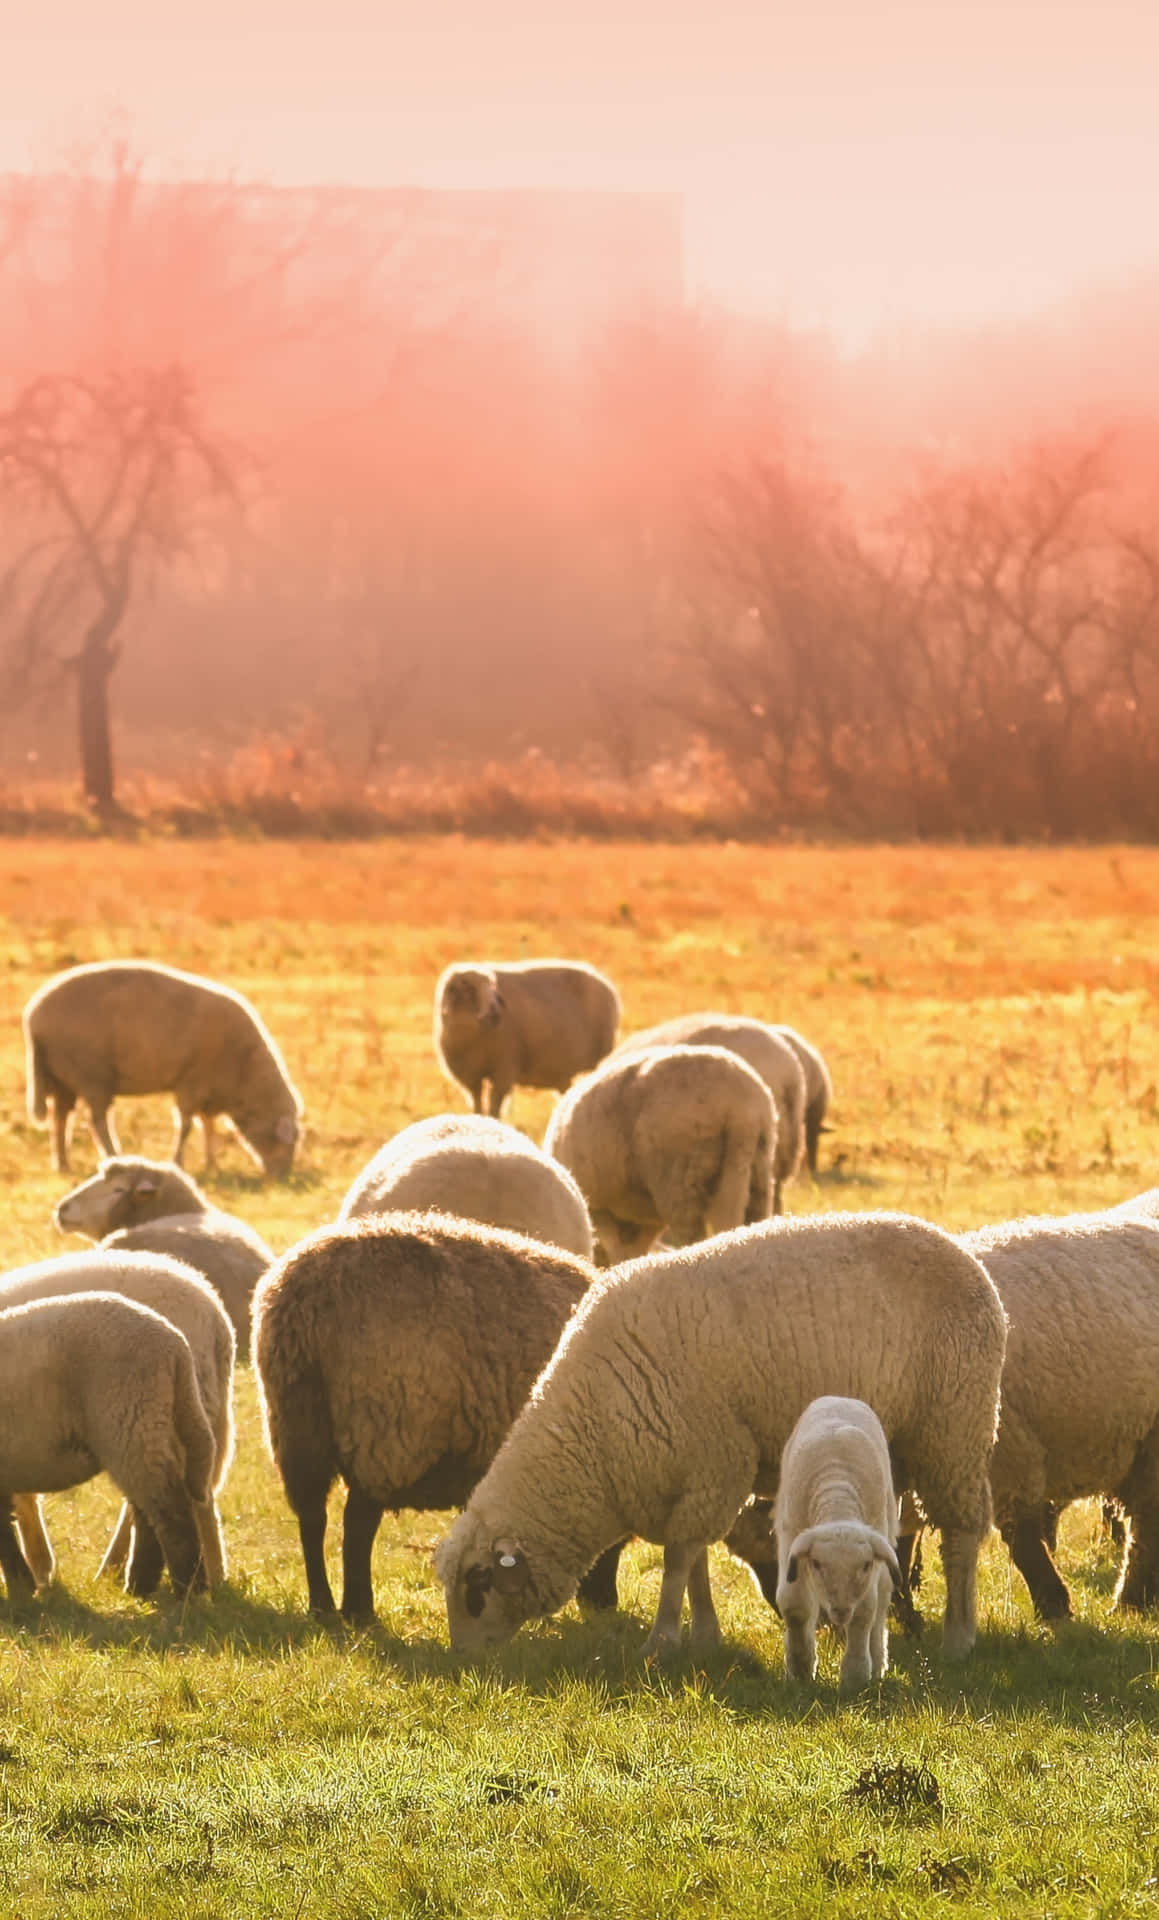 A Group Of Sheep Grazing In A Field Wallpaper